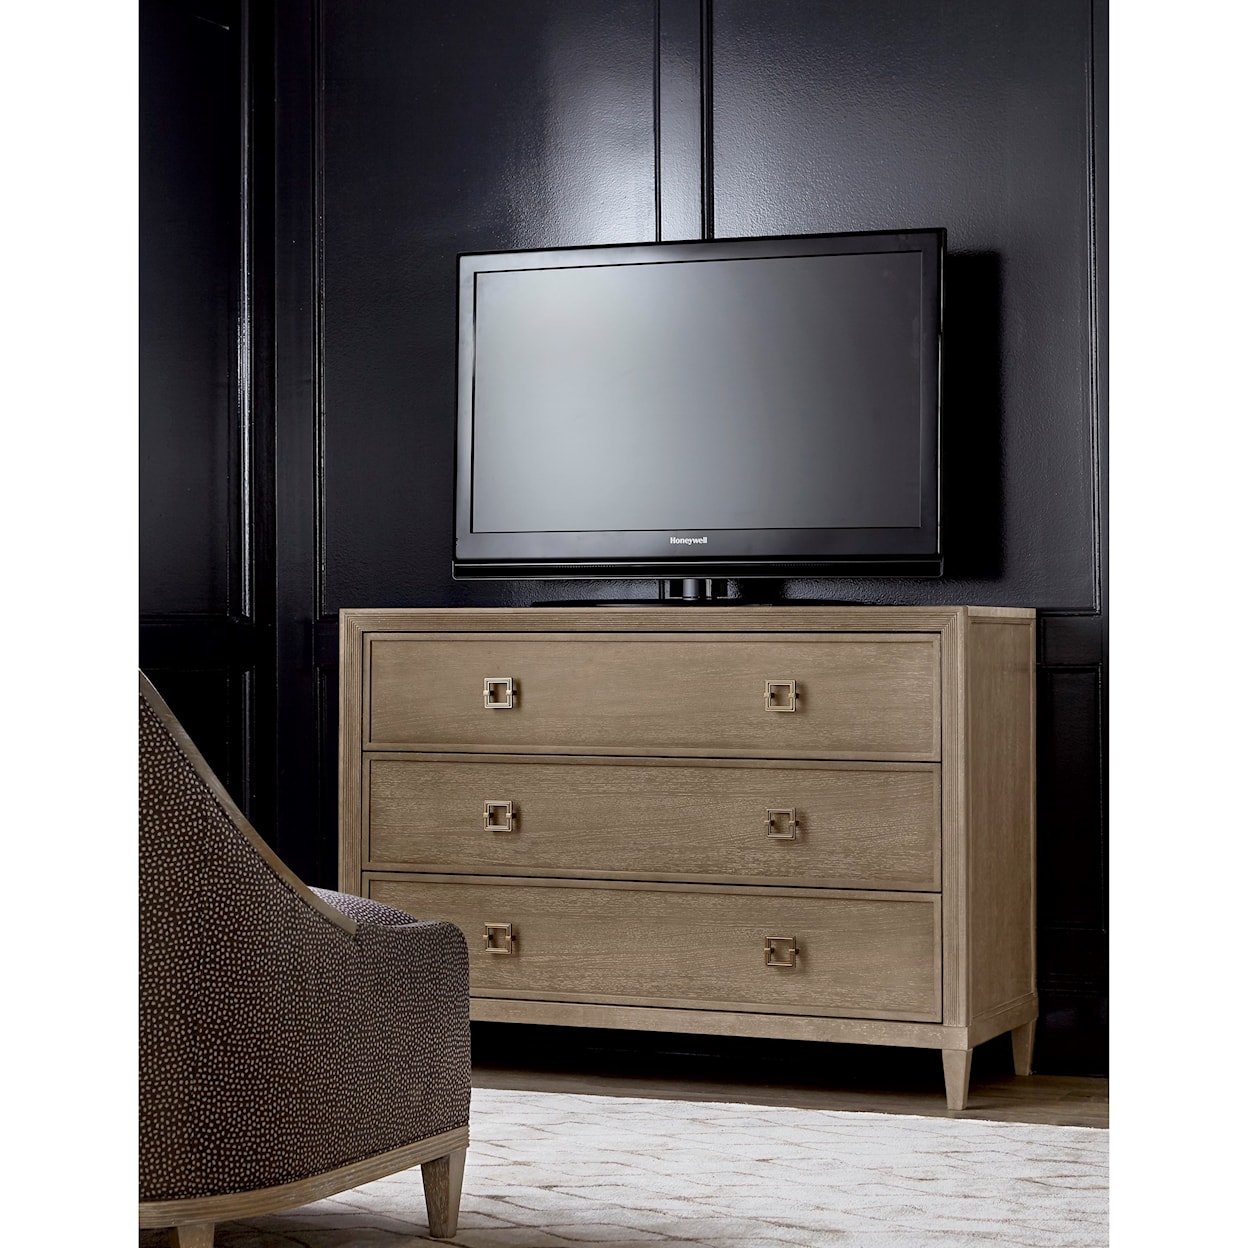 A.R.T. Furniture Inc Cityscapes Whitney Accent Drawer Chest